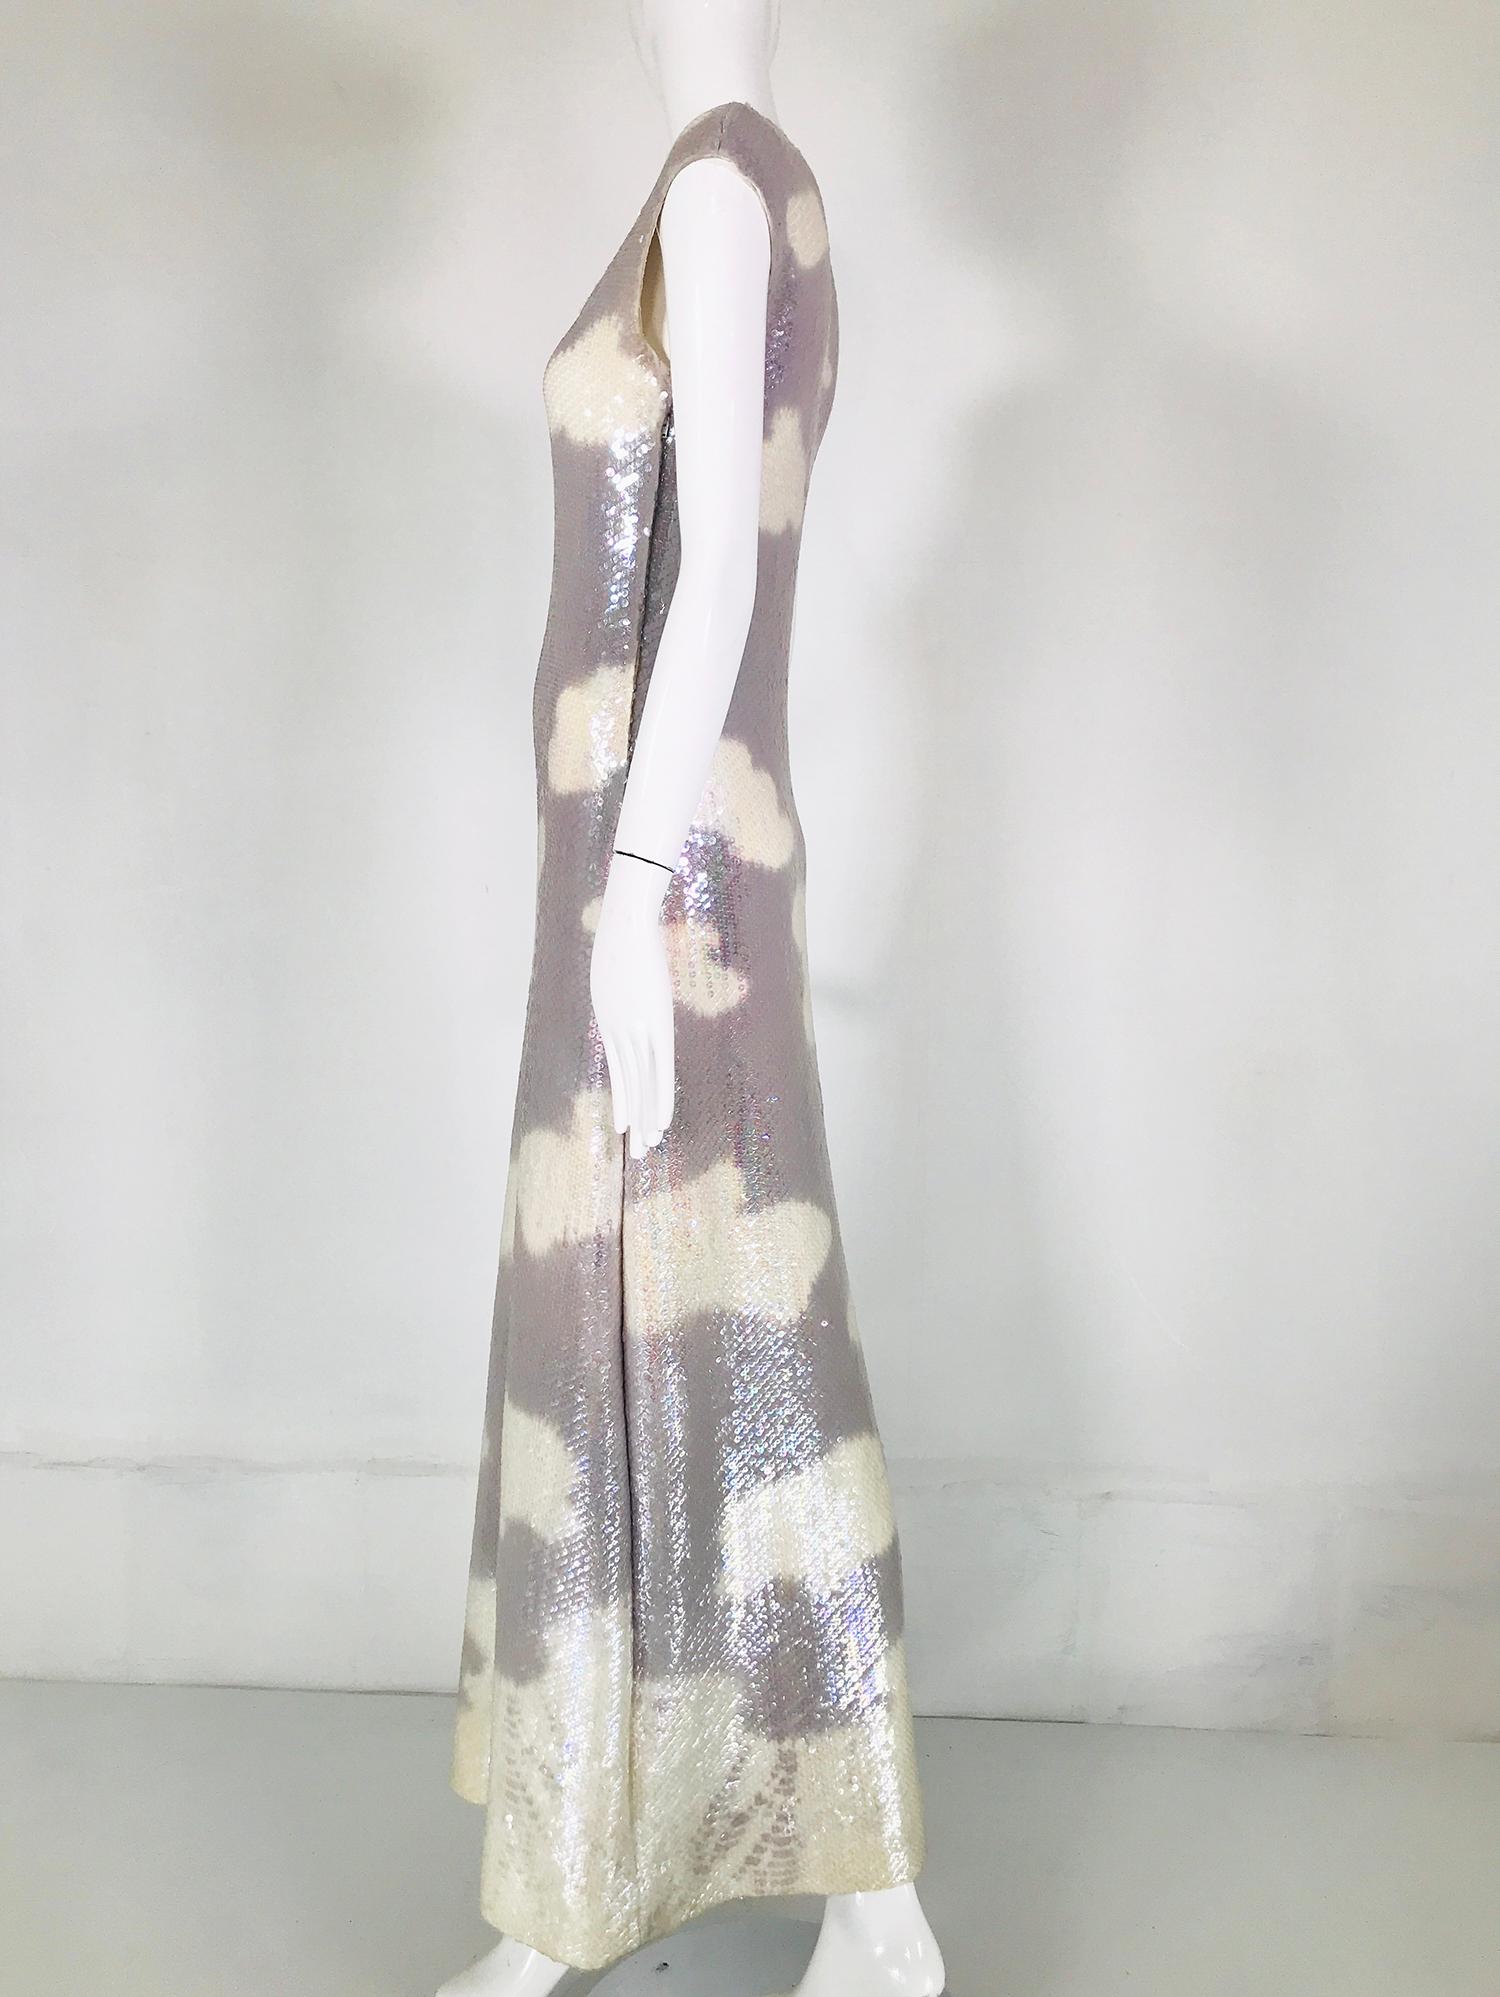 Halston Iconic Clouds Dress in Stormy Grey & Cream Iridescent Sequins Mid 1970s 6